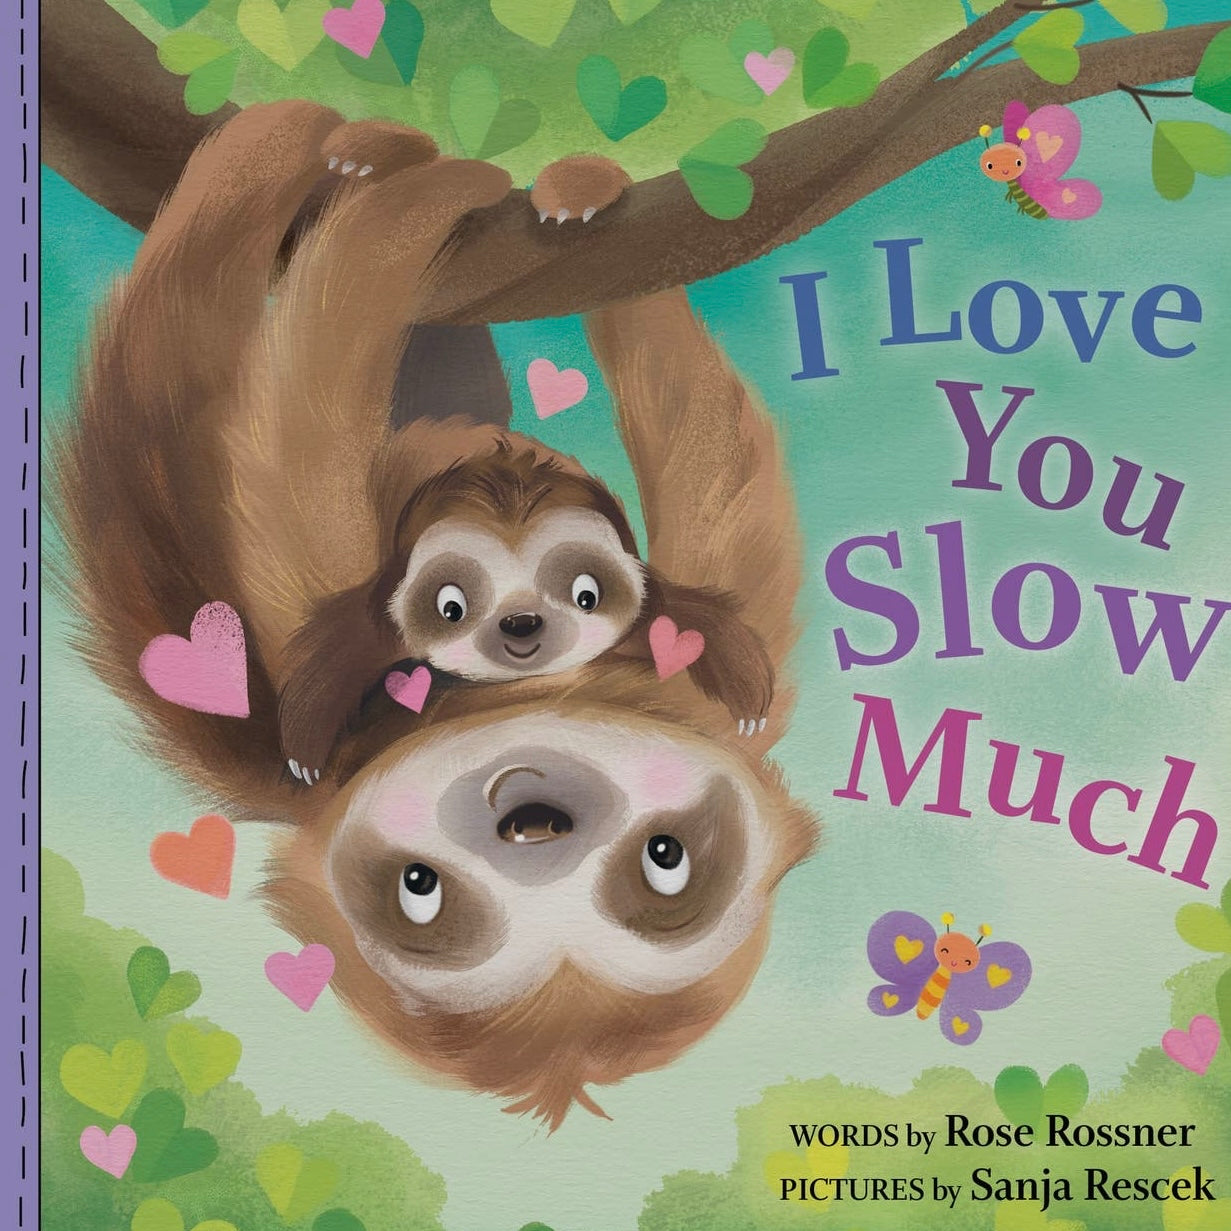 I Love You Slow Much Board Book